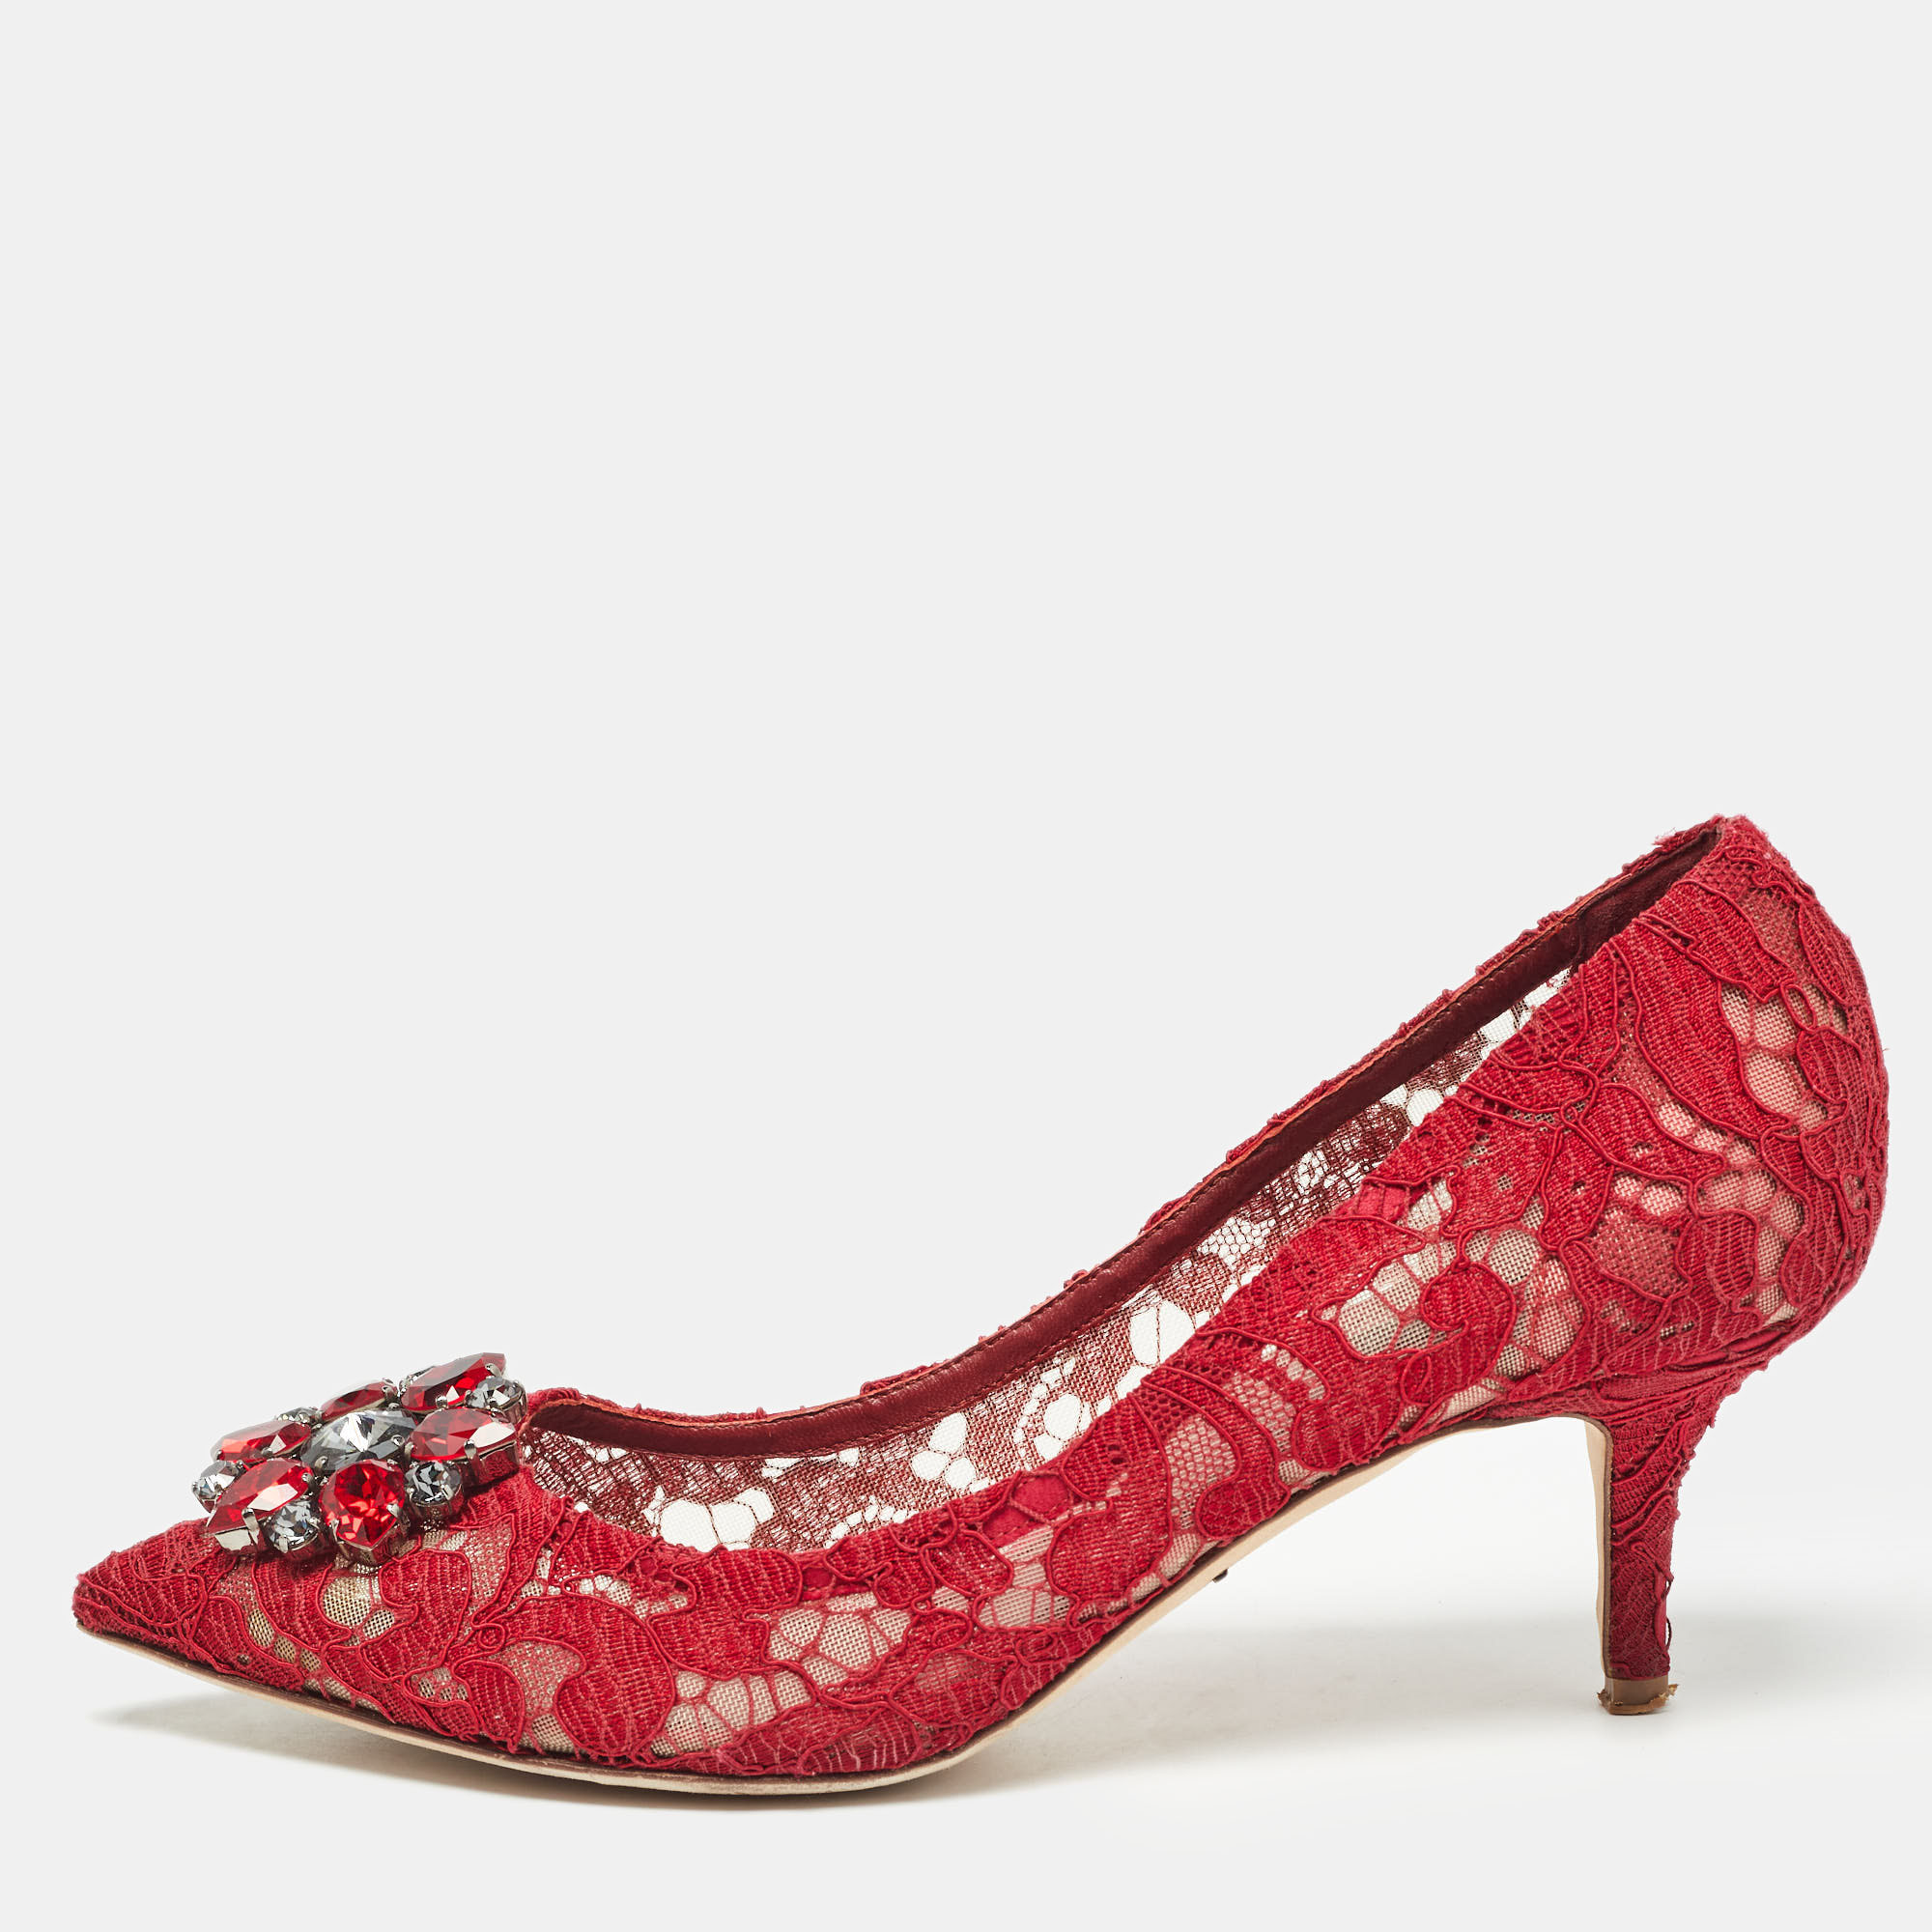 

Dolce & Gabbana Red Lace Crystal Embellished Bellucci Pointed Toe Pumps Size